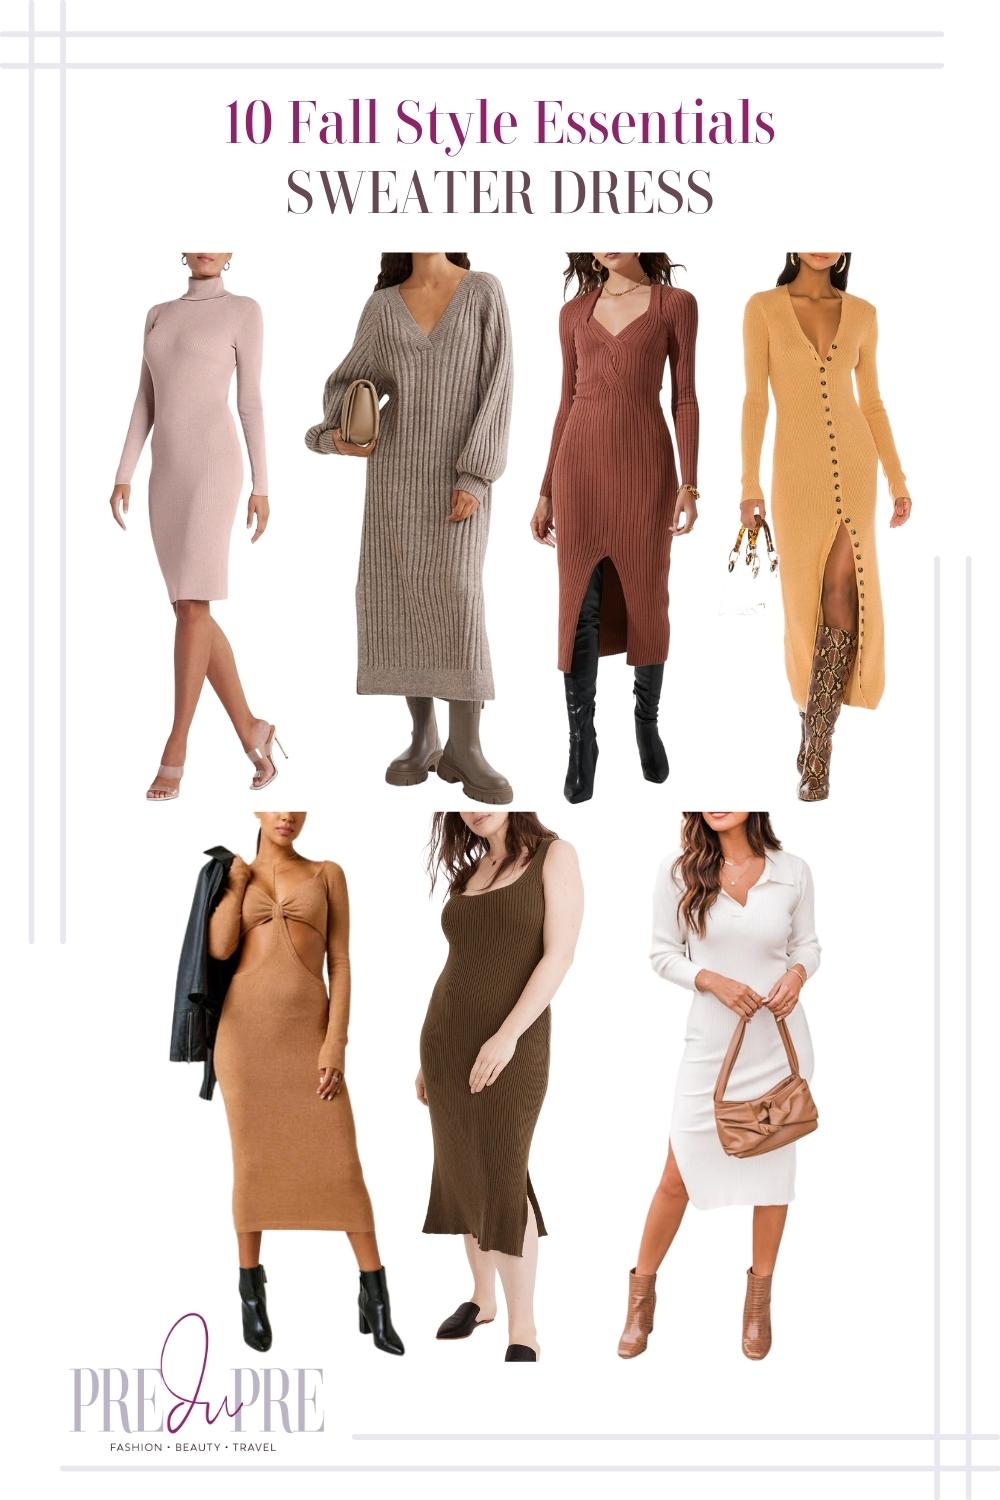 Collage of sweater dresses. From clockwise: muted pink turtleneck sweater dress, grey chunky knit ribbed sweater dress, rust brown sweater dress with front slit, yellow button down sweater dress, white collared sweater dress with a side slit, olive green thick strapped ribbed sweater dress, and brown cut-out sweater dress.